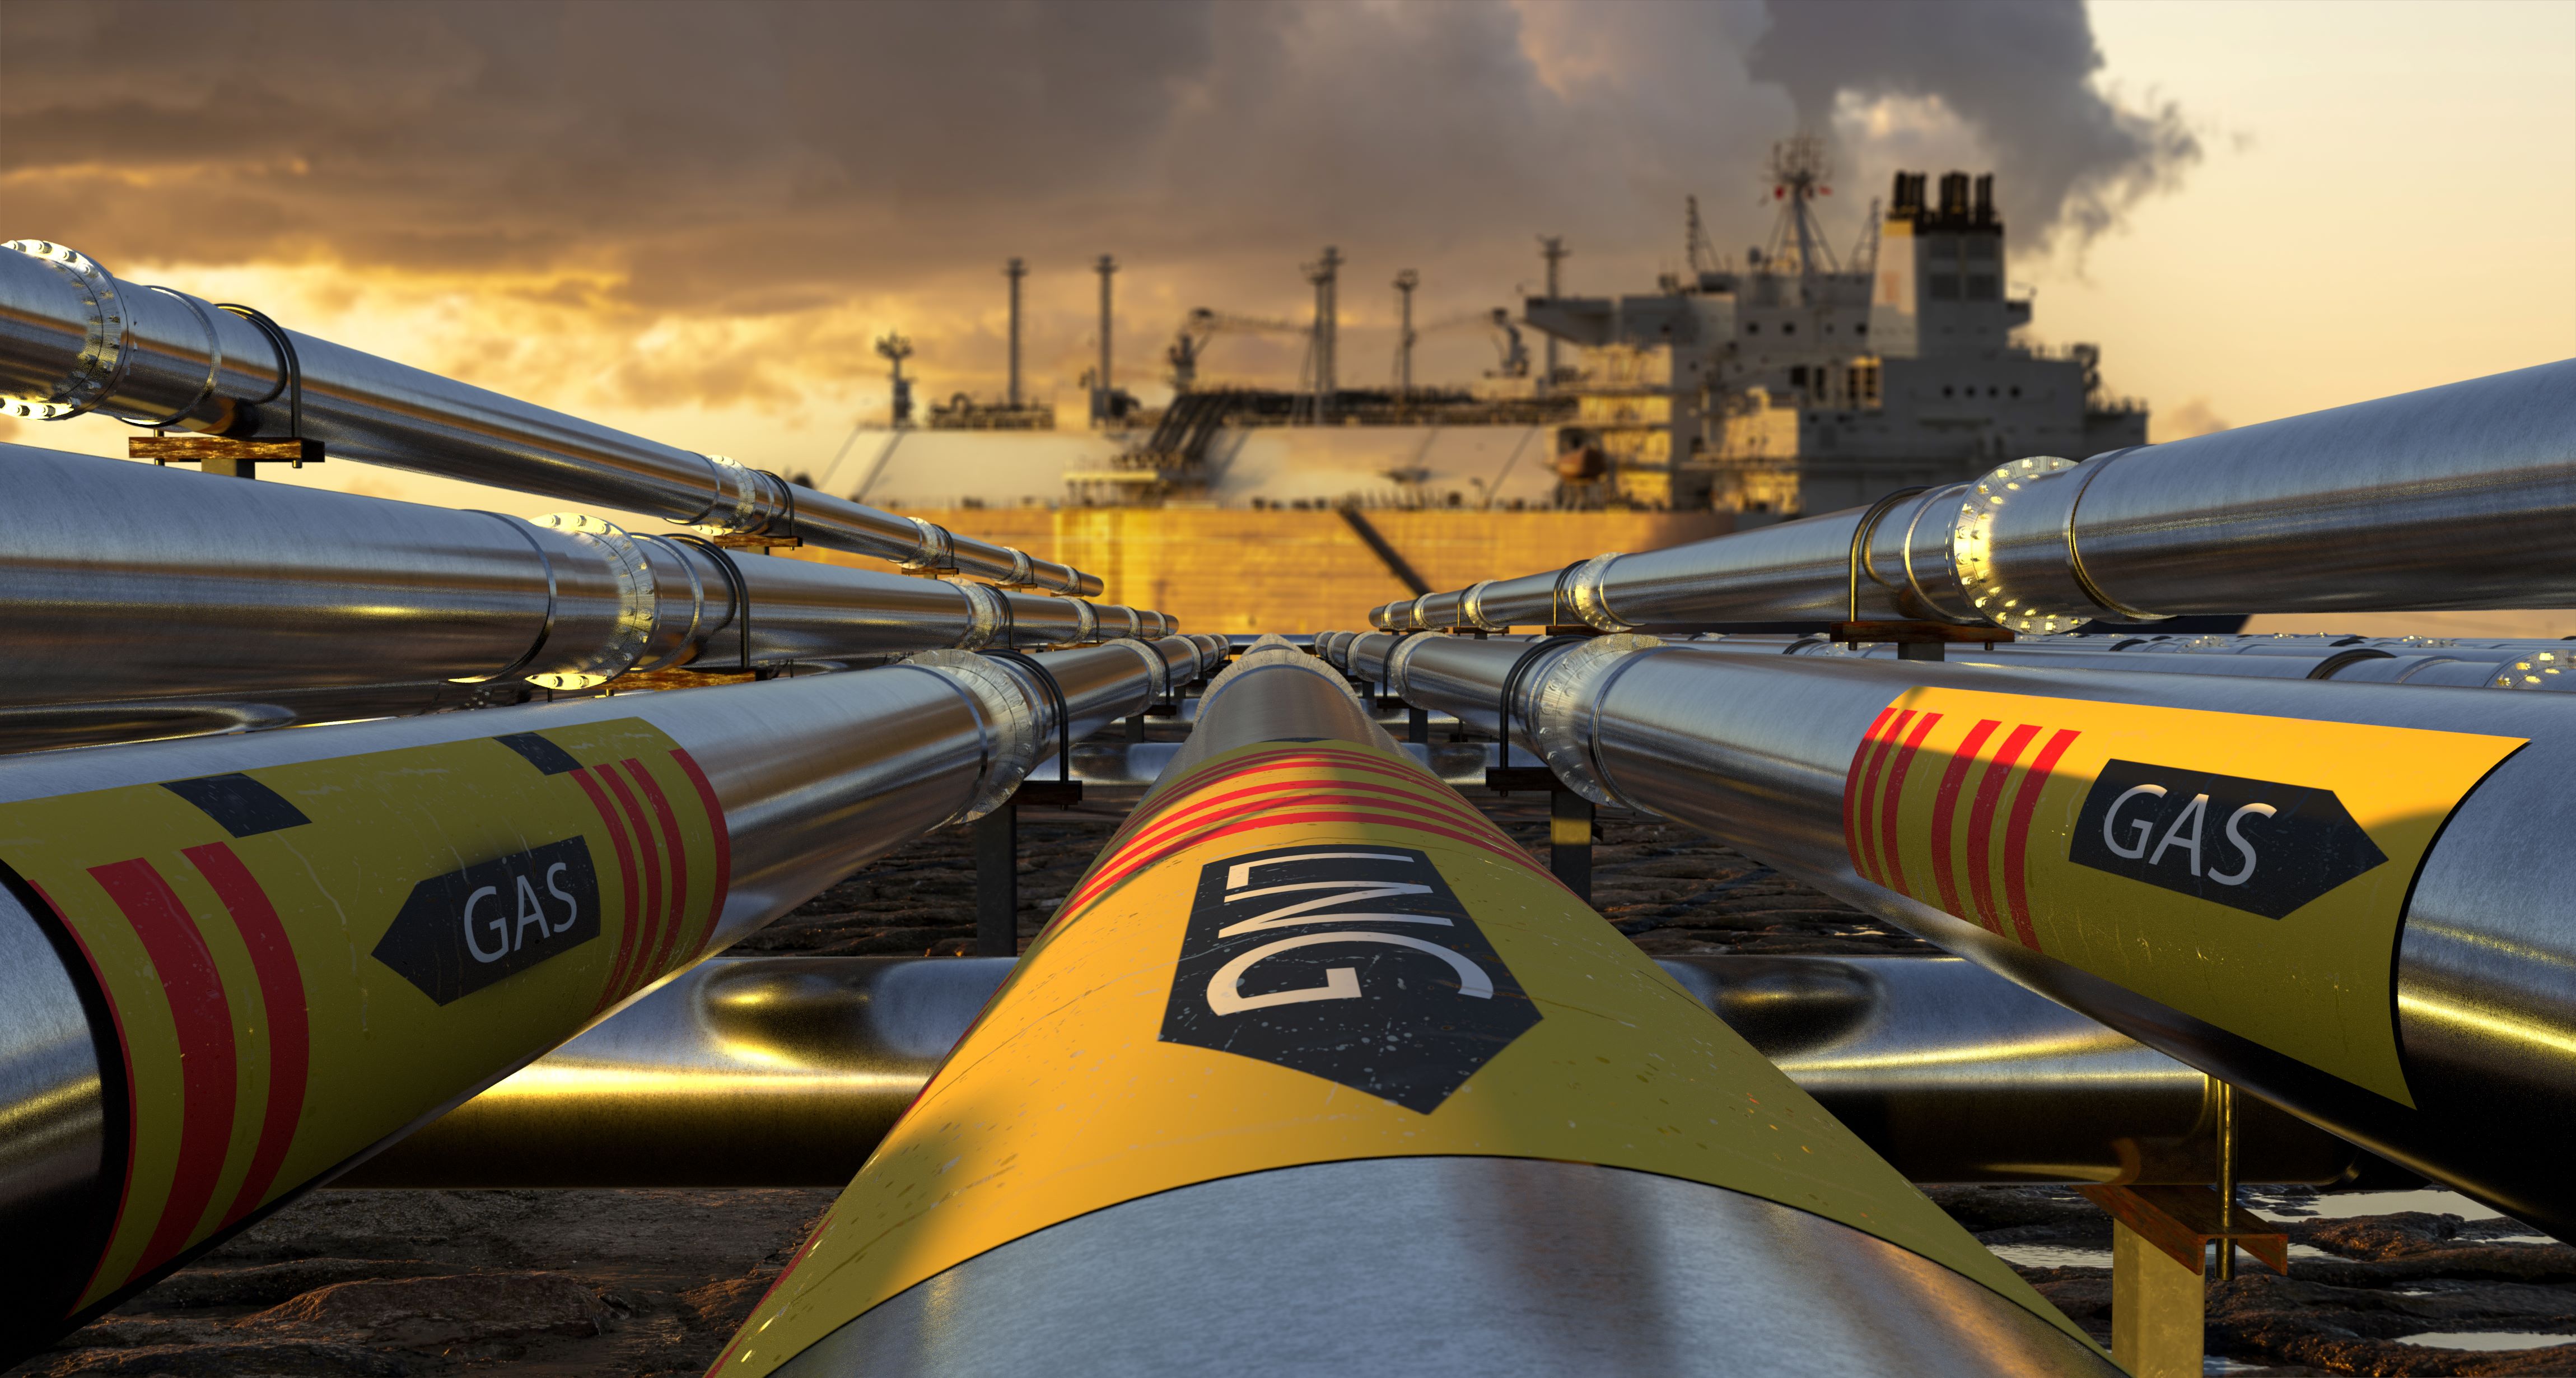 LNG pipes leading to gasworks with 'gas' and 'LNG' stickers